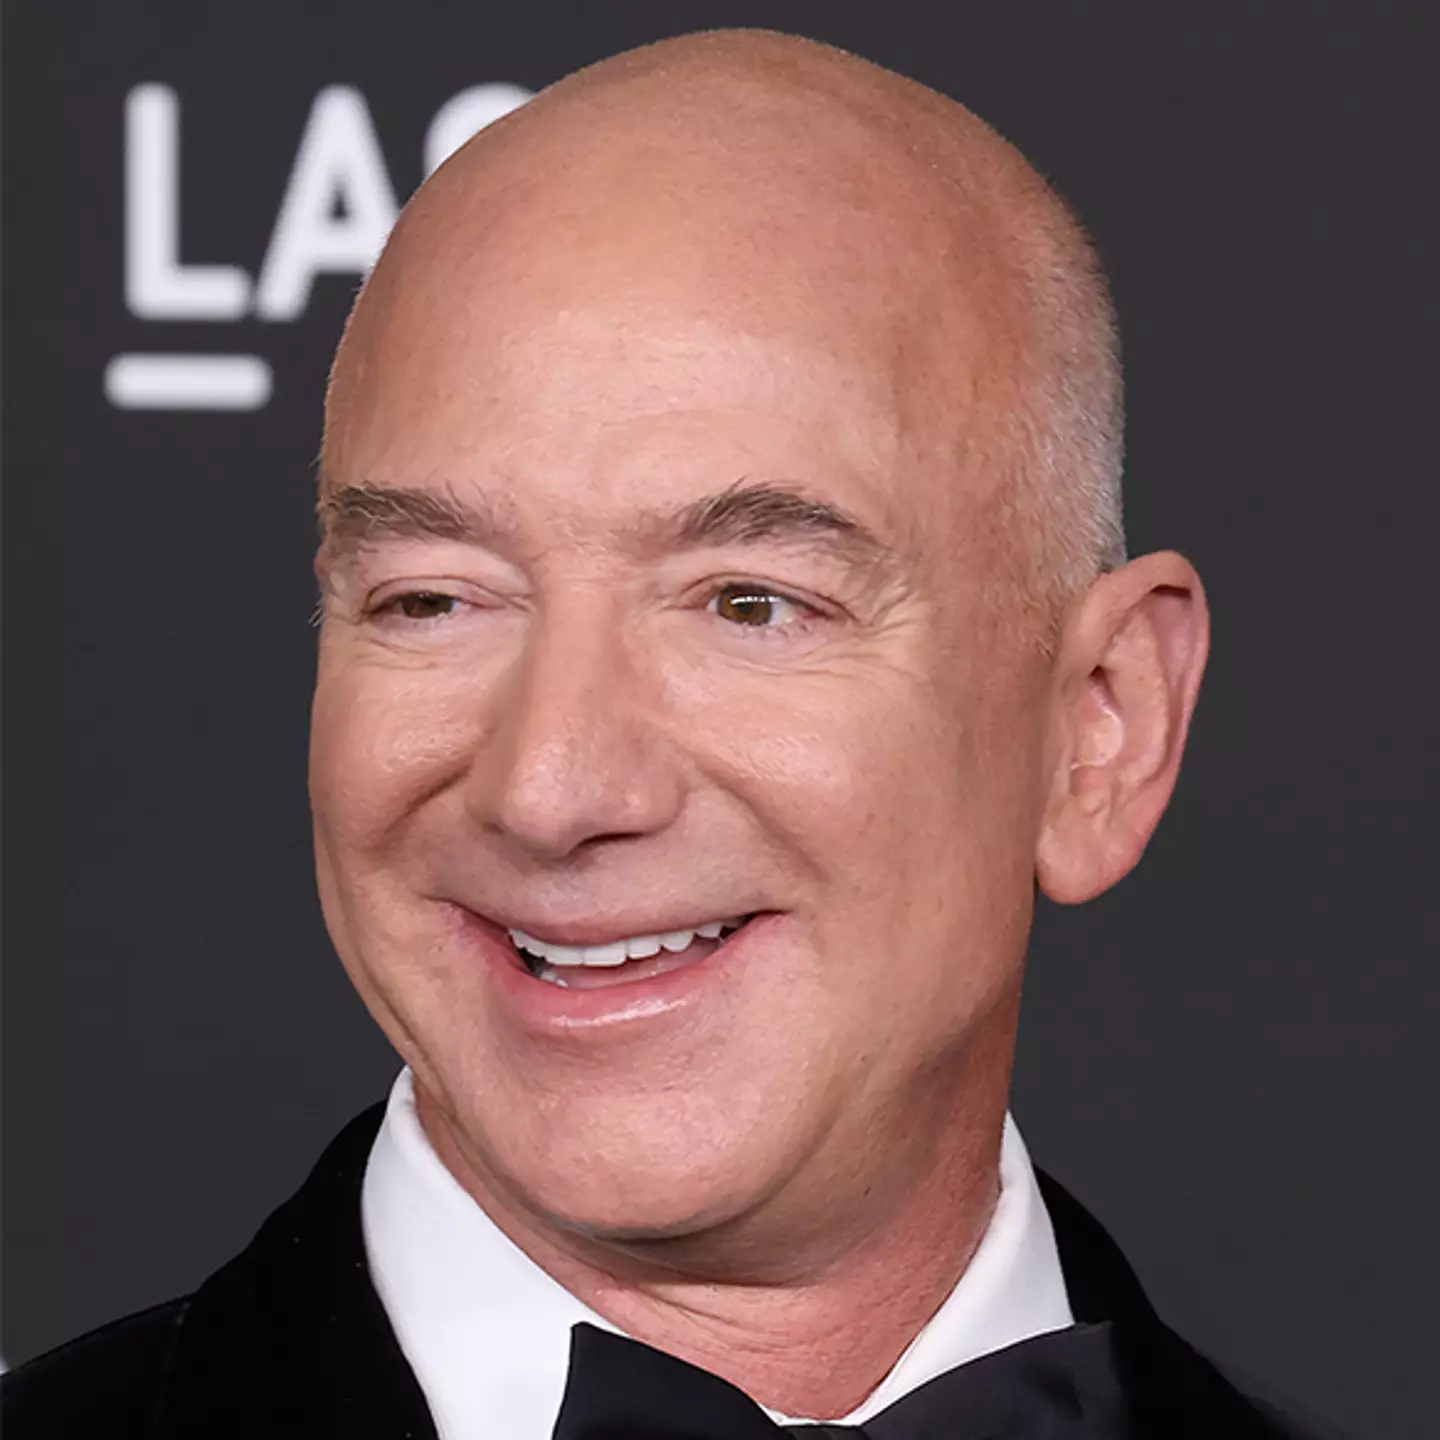 Jeff Bezos’ 60th birthday bash had a strict rule for guests